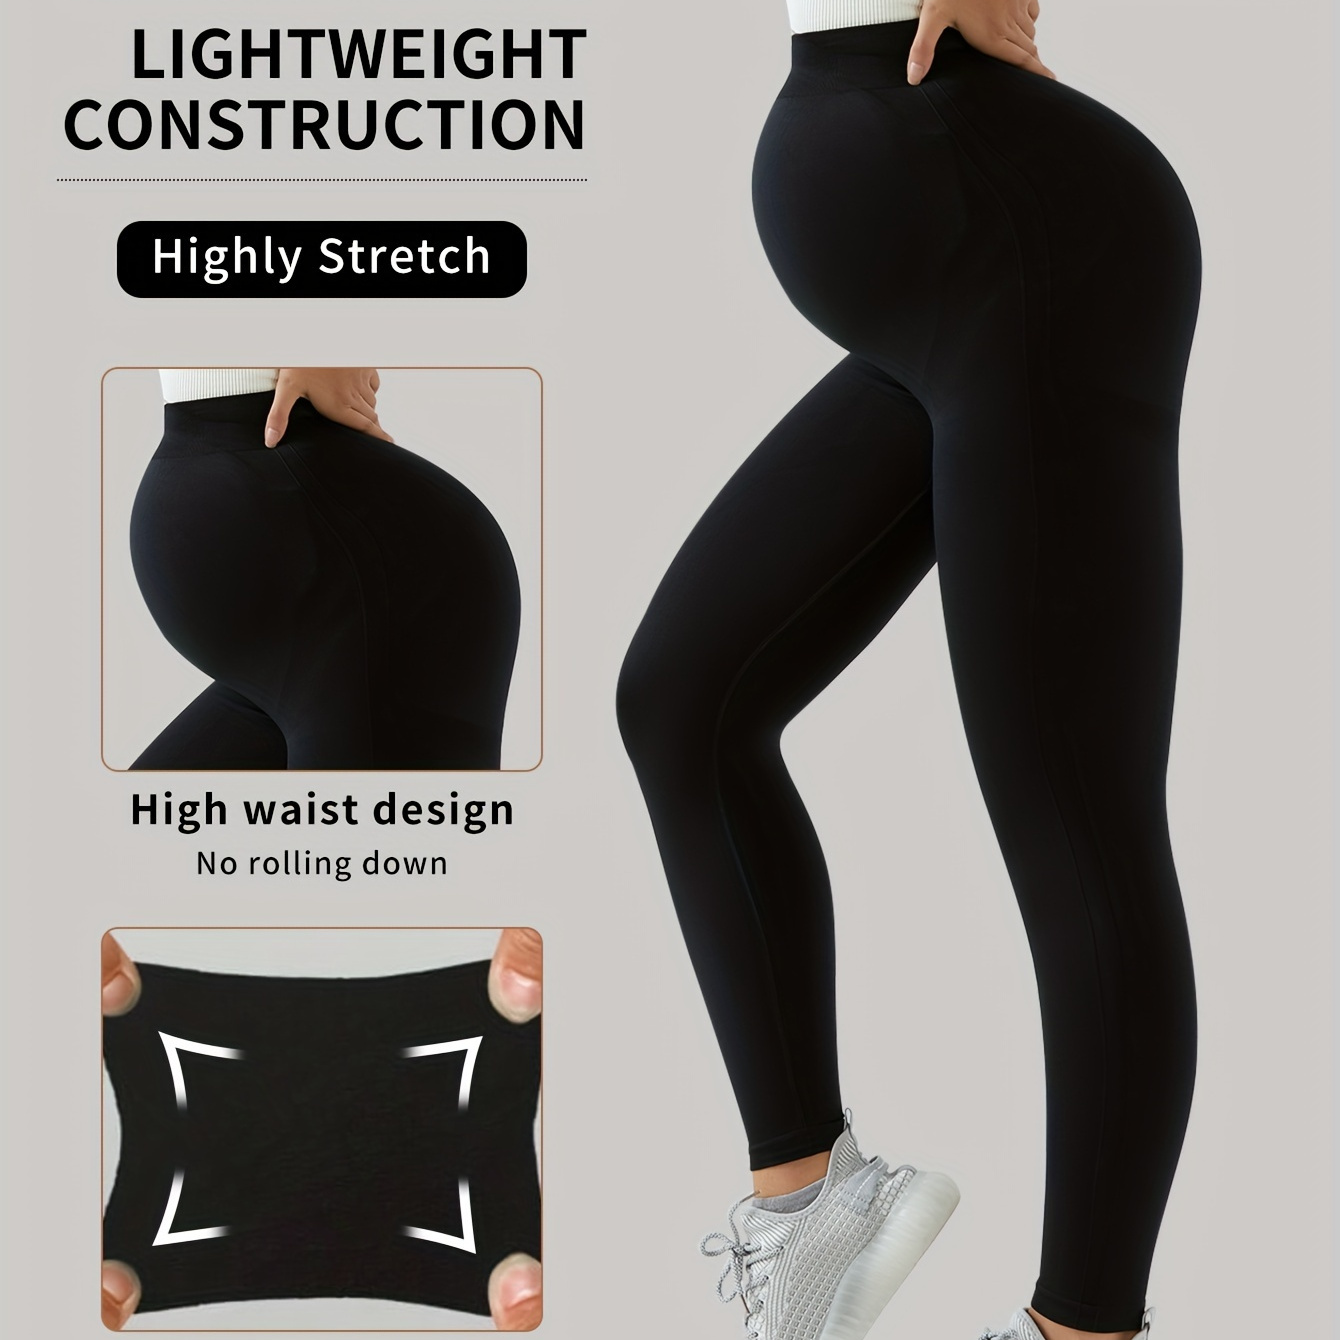 

Women's Maternity Solid Leggings, Fashion Casual Slim Fit Sports Yoga Highly Stretchy Pants For Fall Winter, Pregnant Women's Clothing